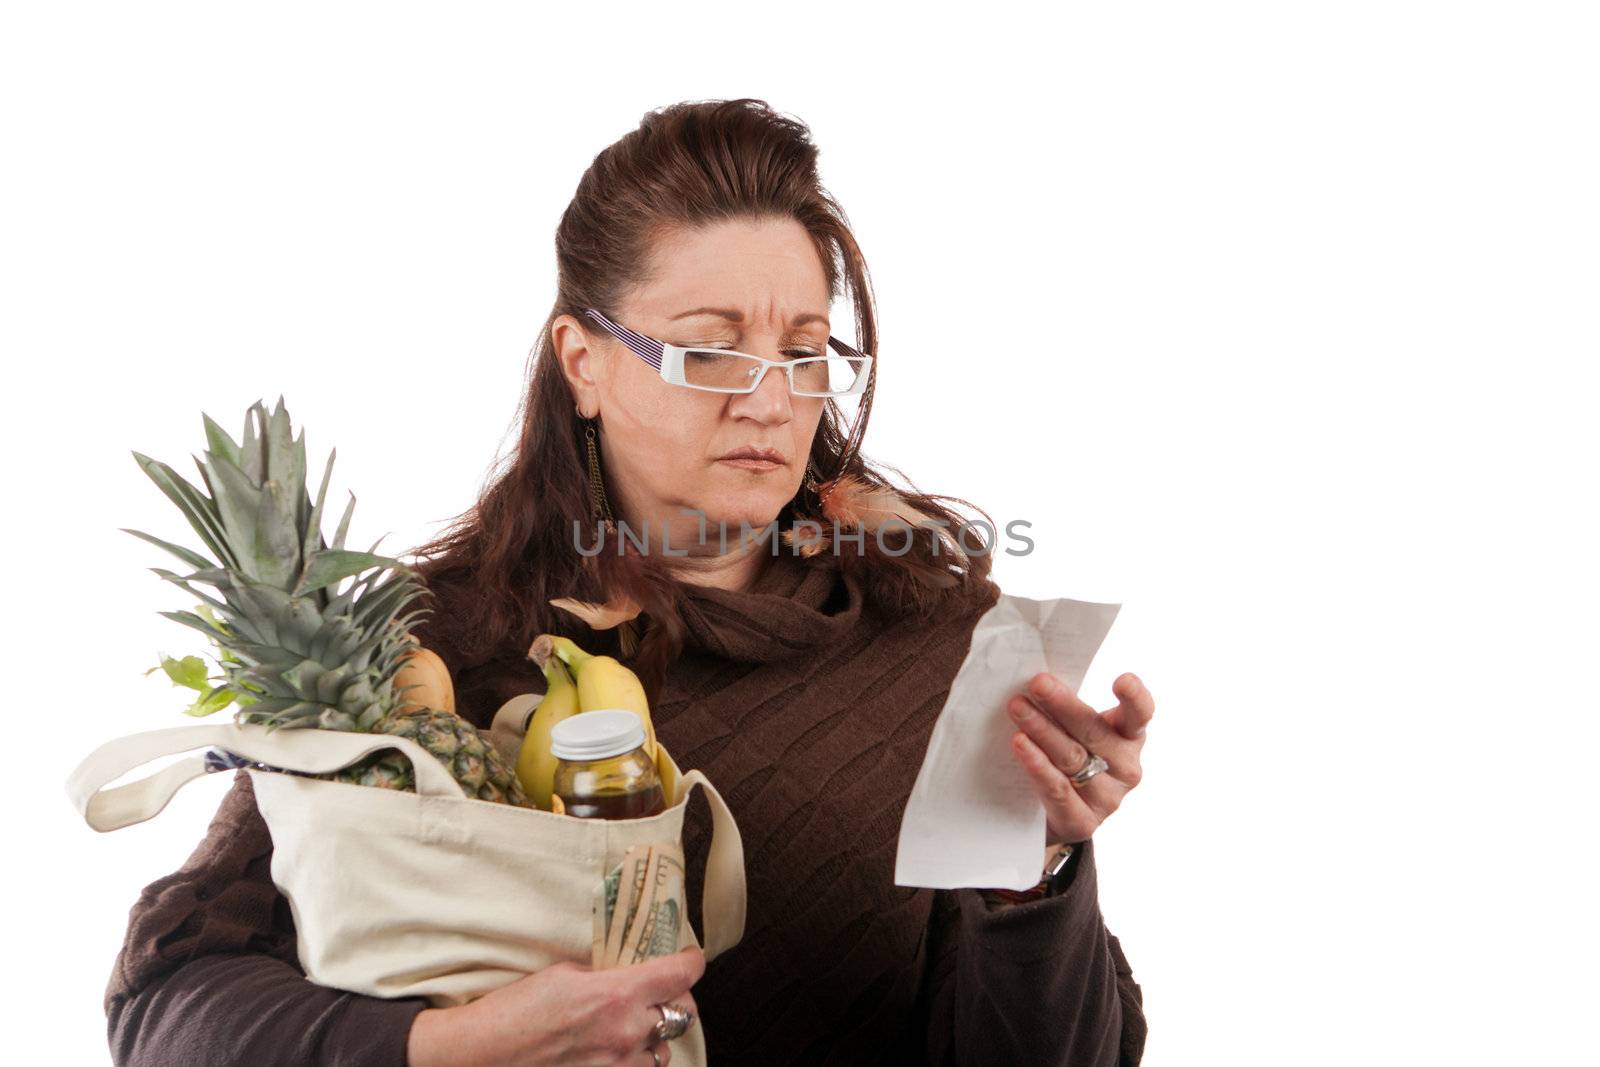 Middle aged woman carefully examining her register receipt reviewing her grocery shopping bill.